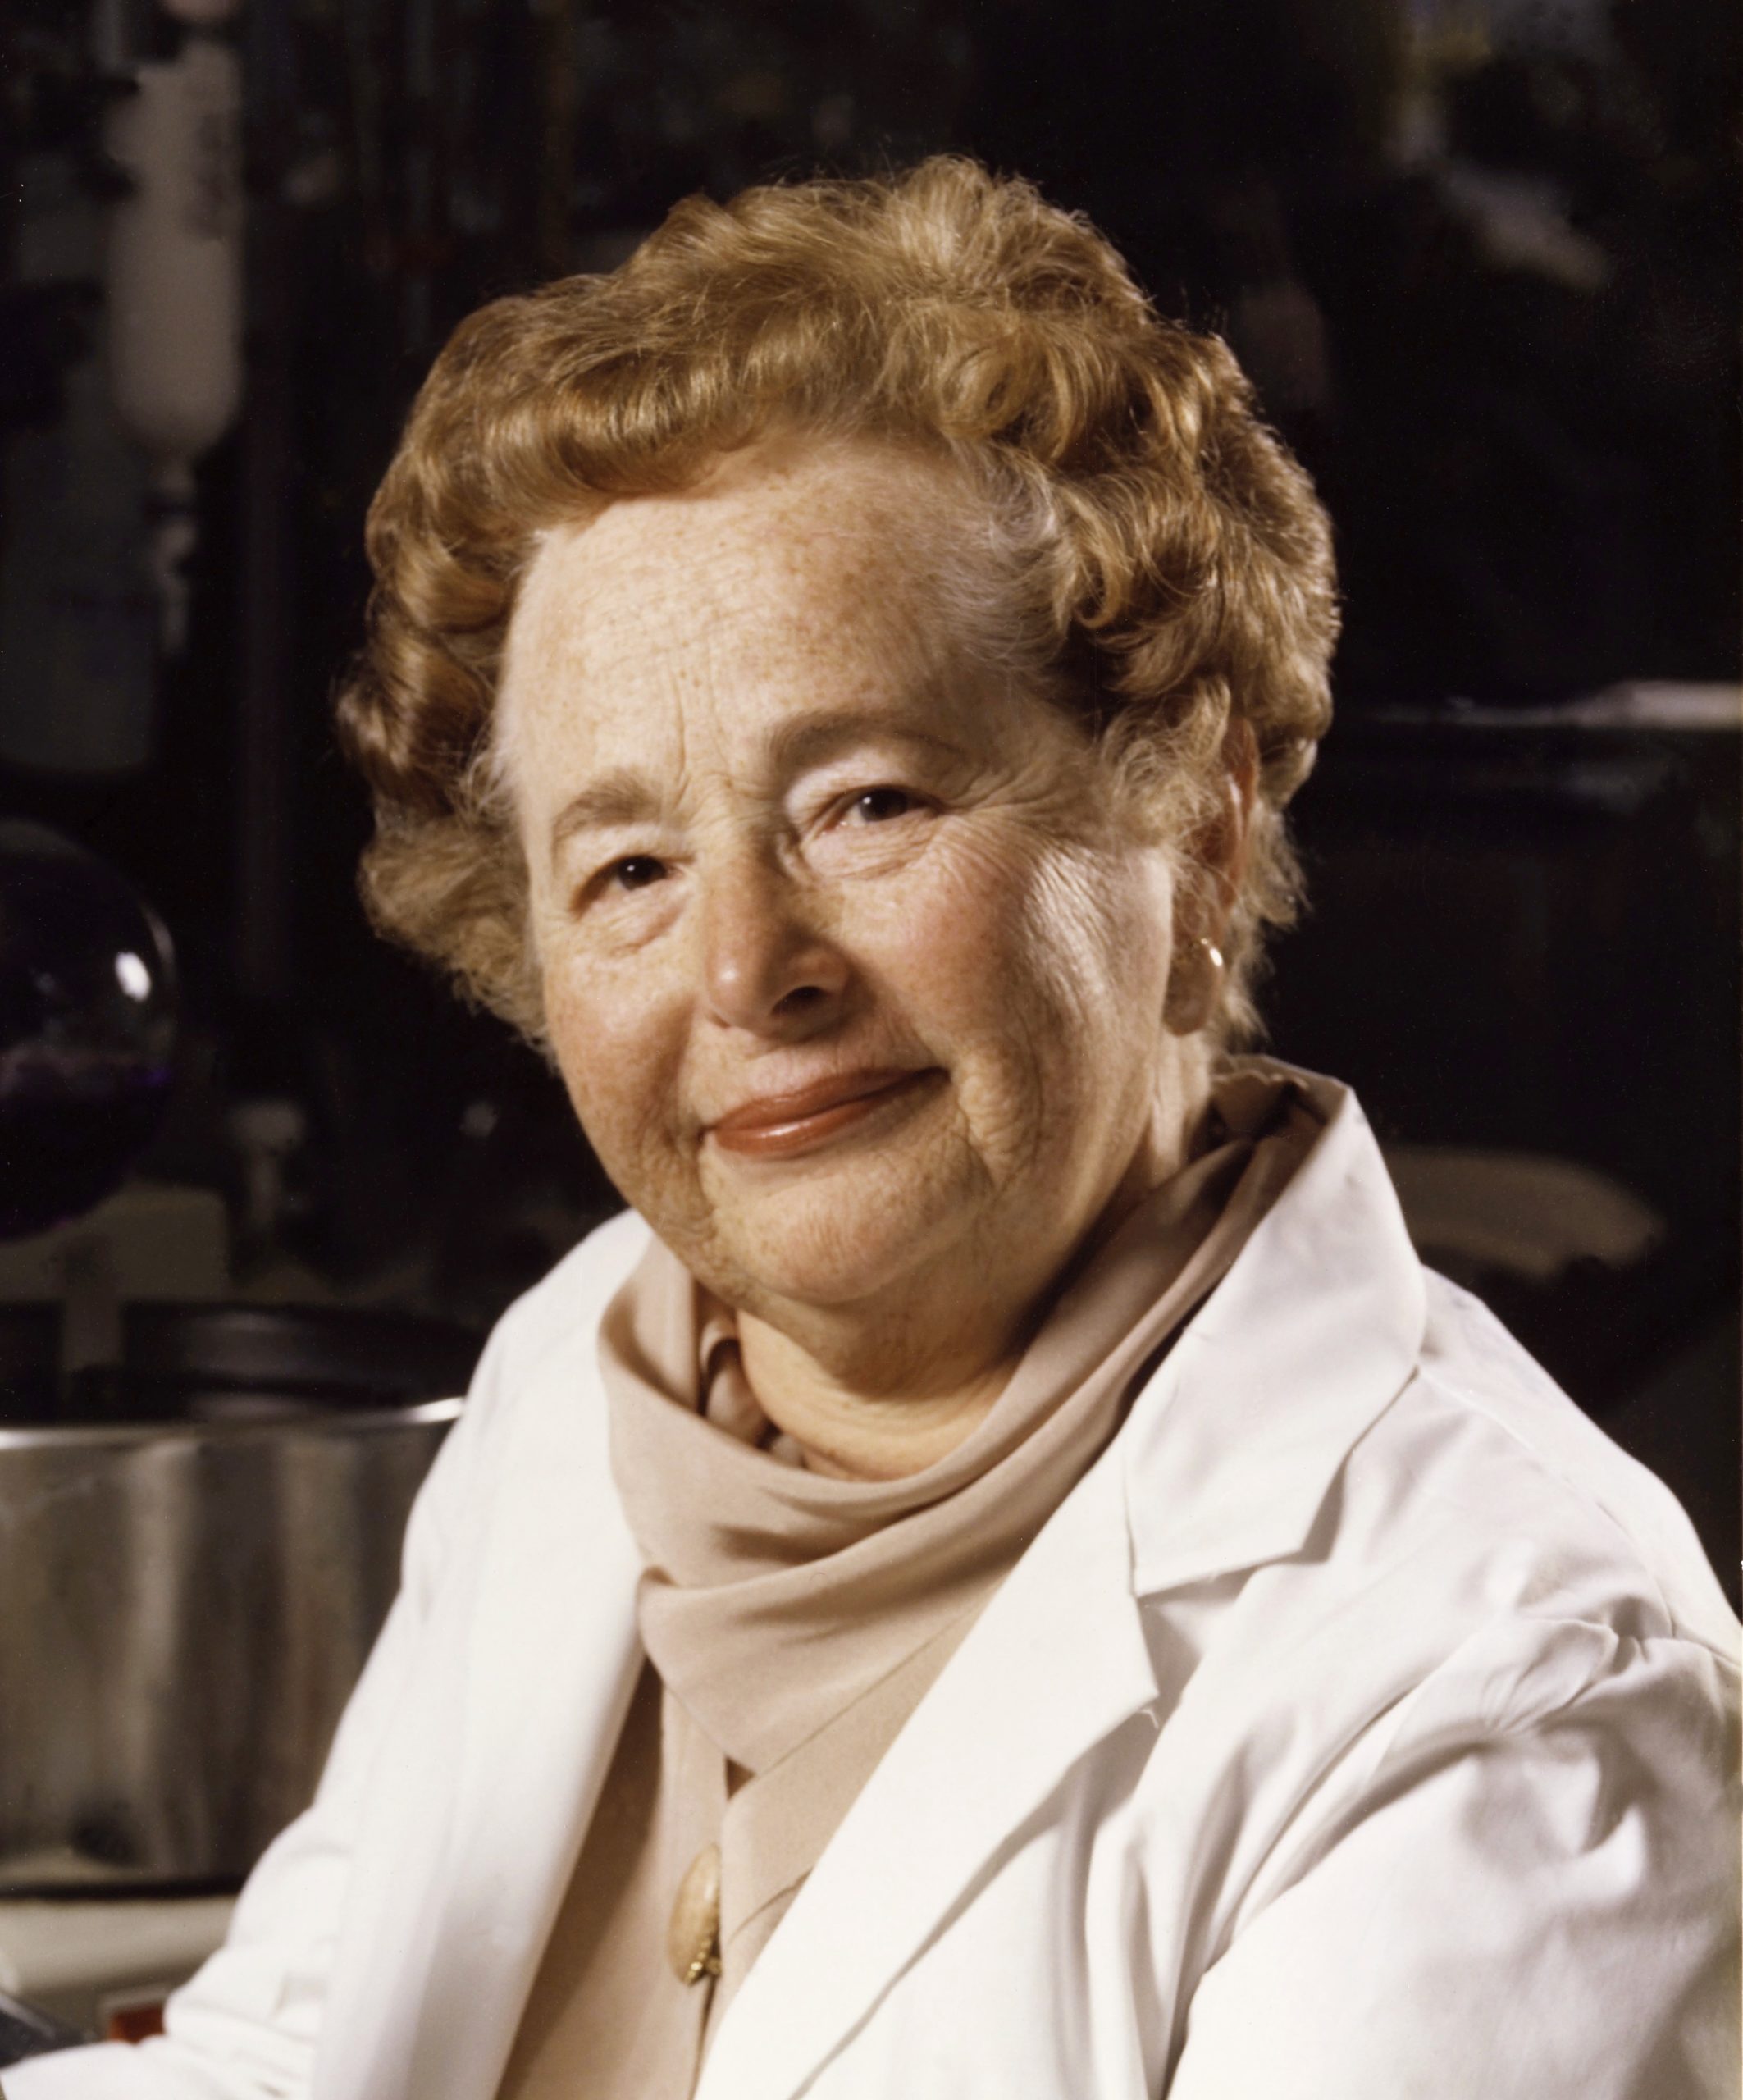 Top 10 Famous Women Scientists in History - Gertrude Elion